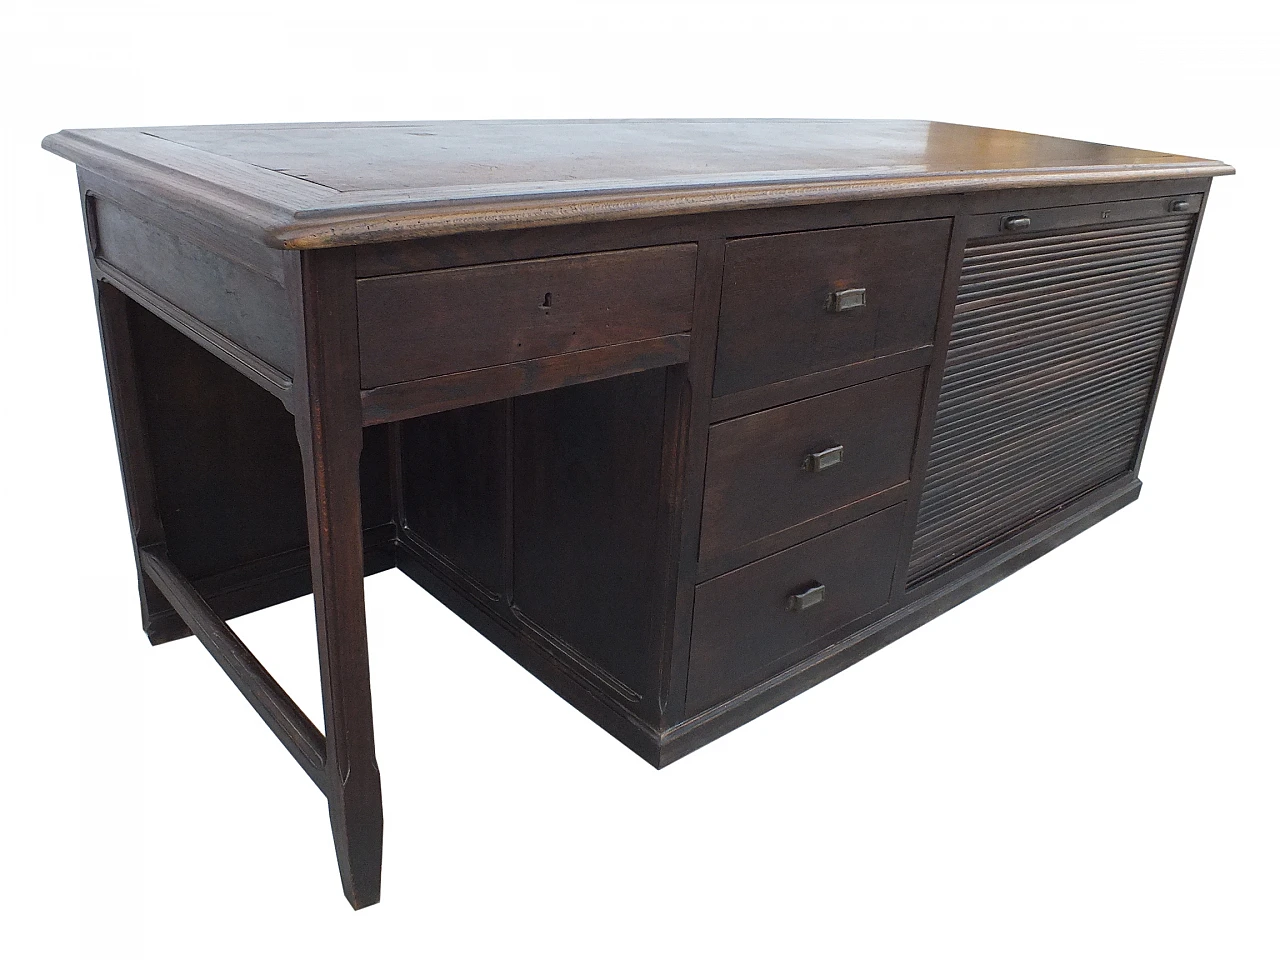 Chestnut shutter desk with drawers & compartments for projects, 1920s 12